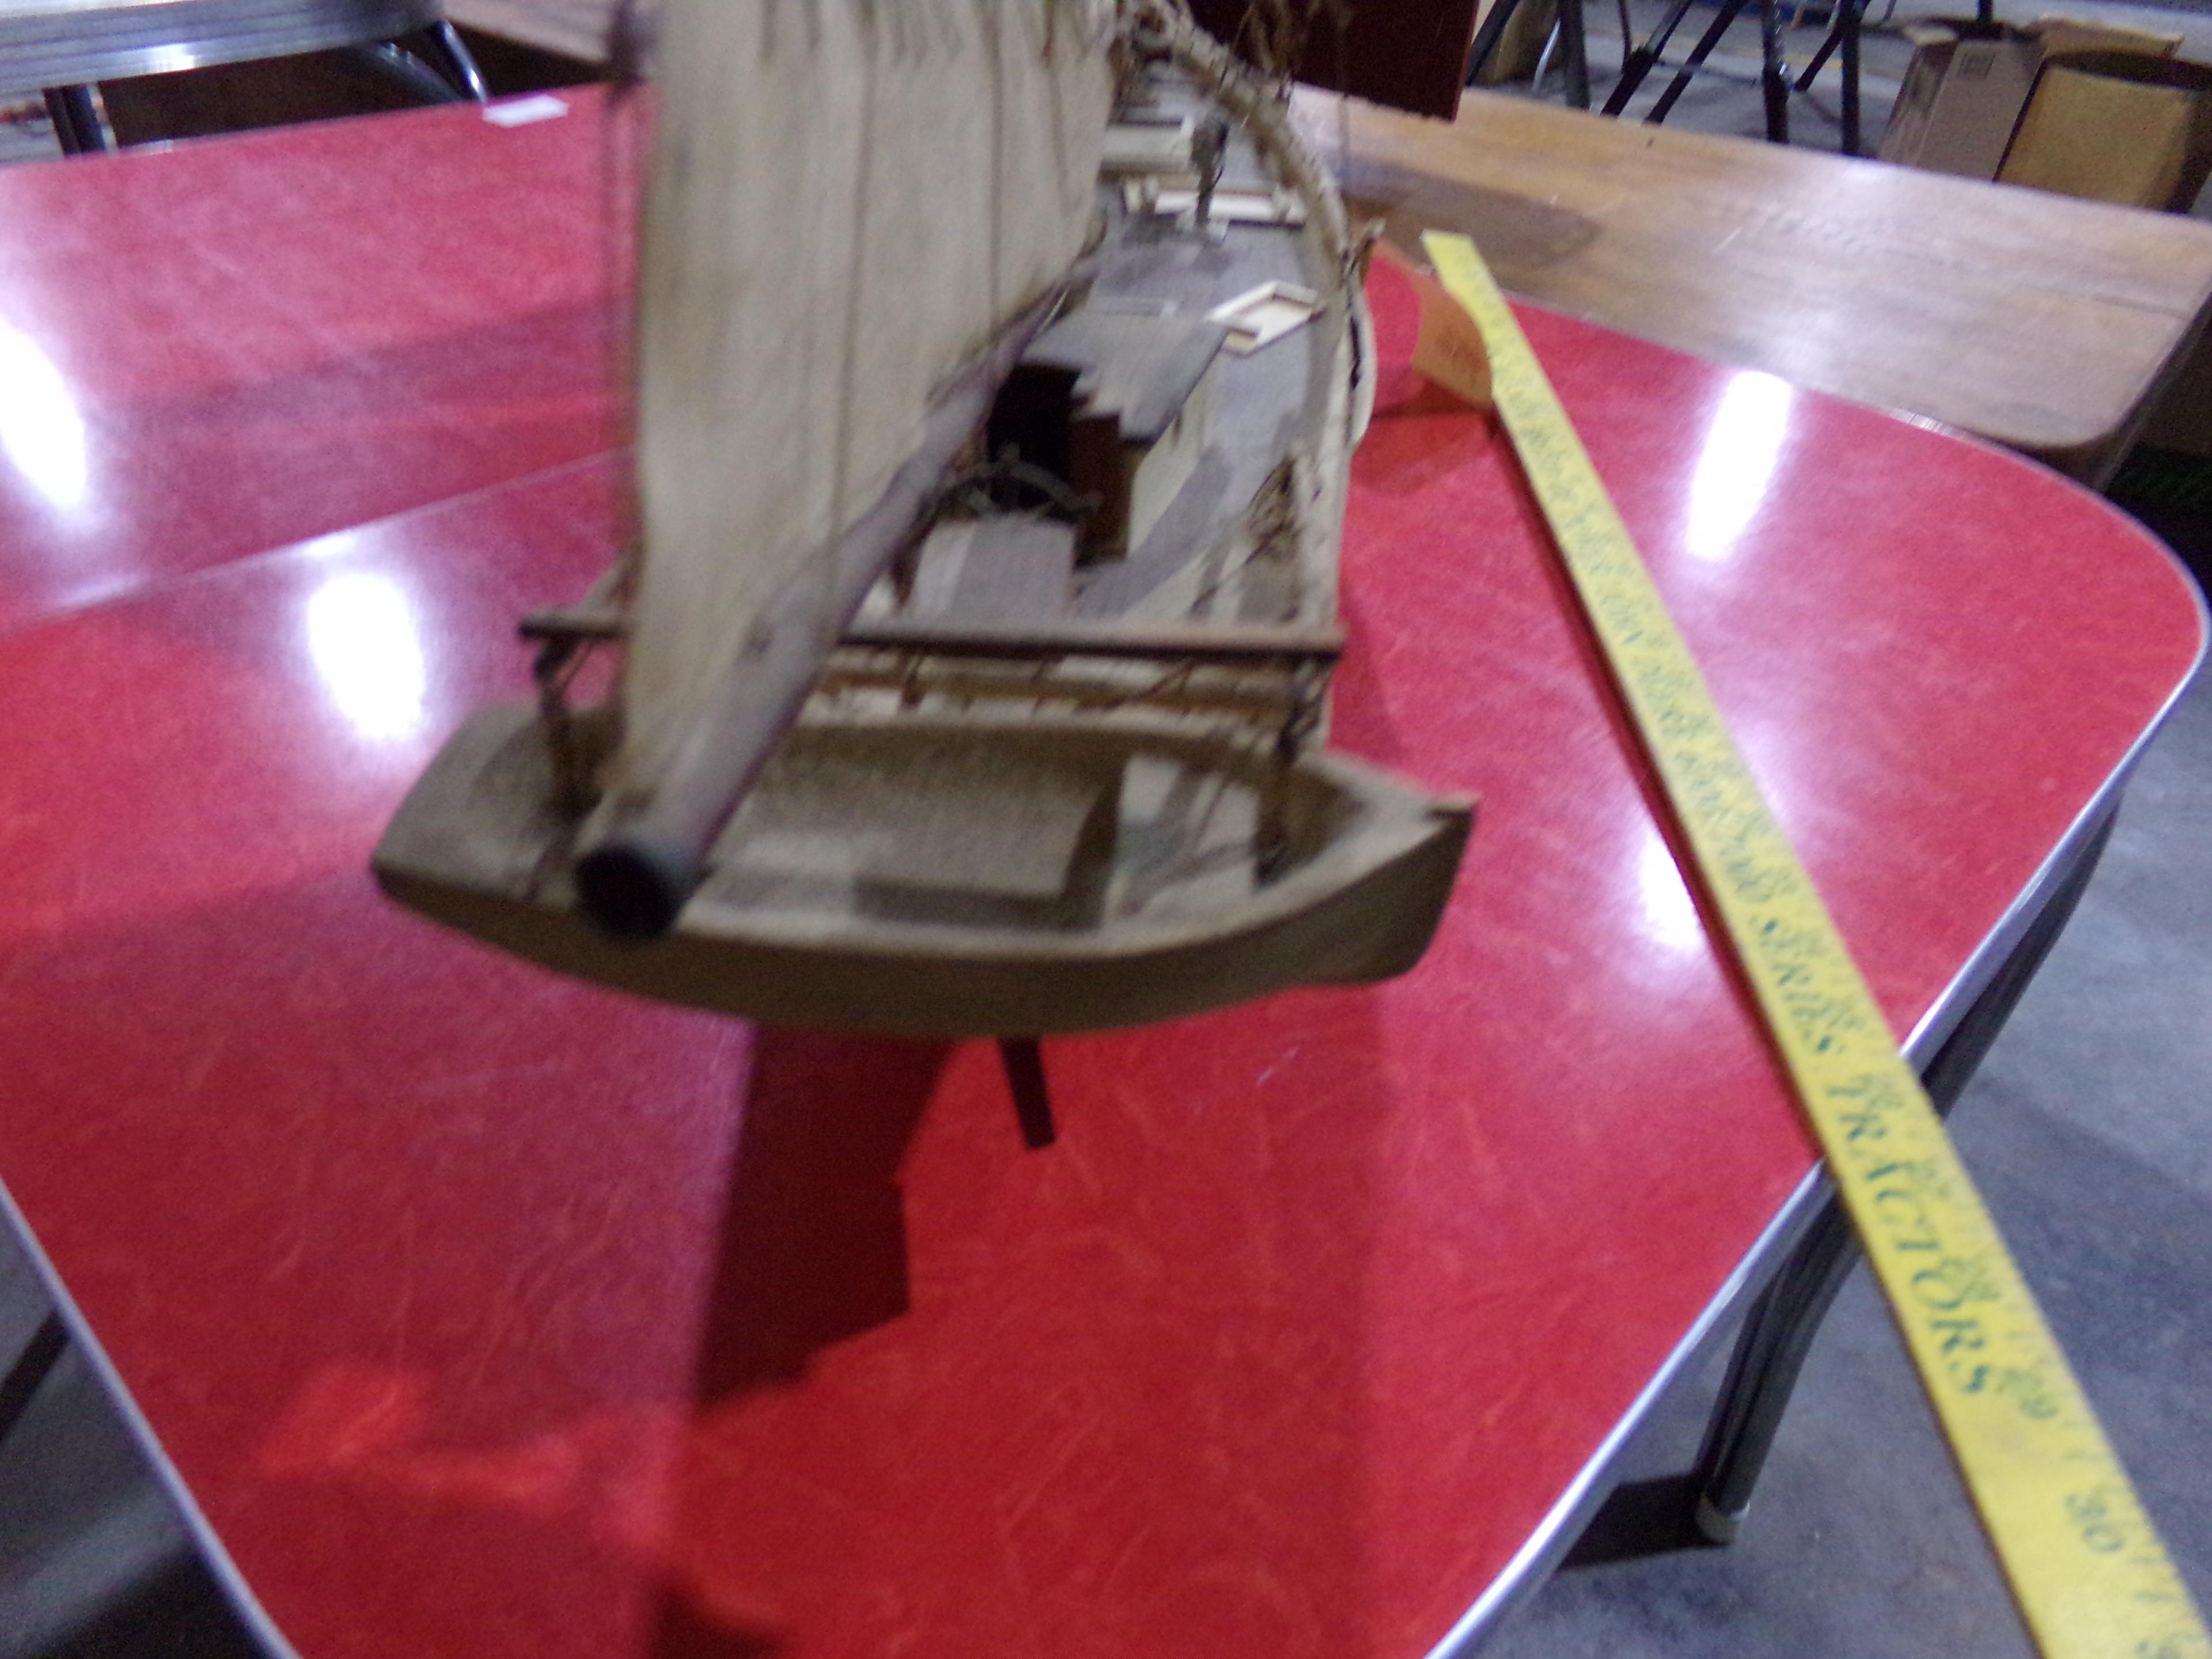 WOODEN SKIPJACK MODEL BUILT BY JOHNNY NORTH FROM WINGATE MARYLAND ENTITLED